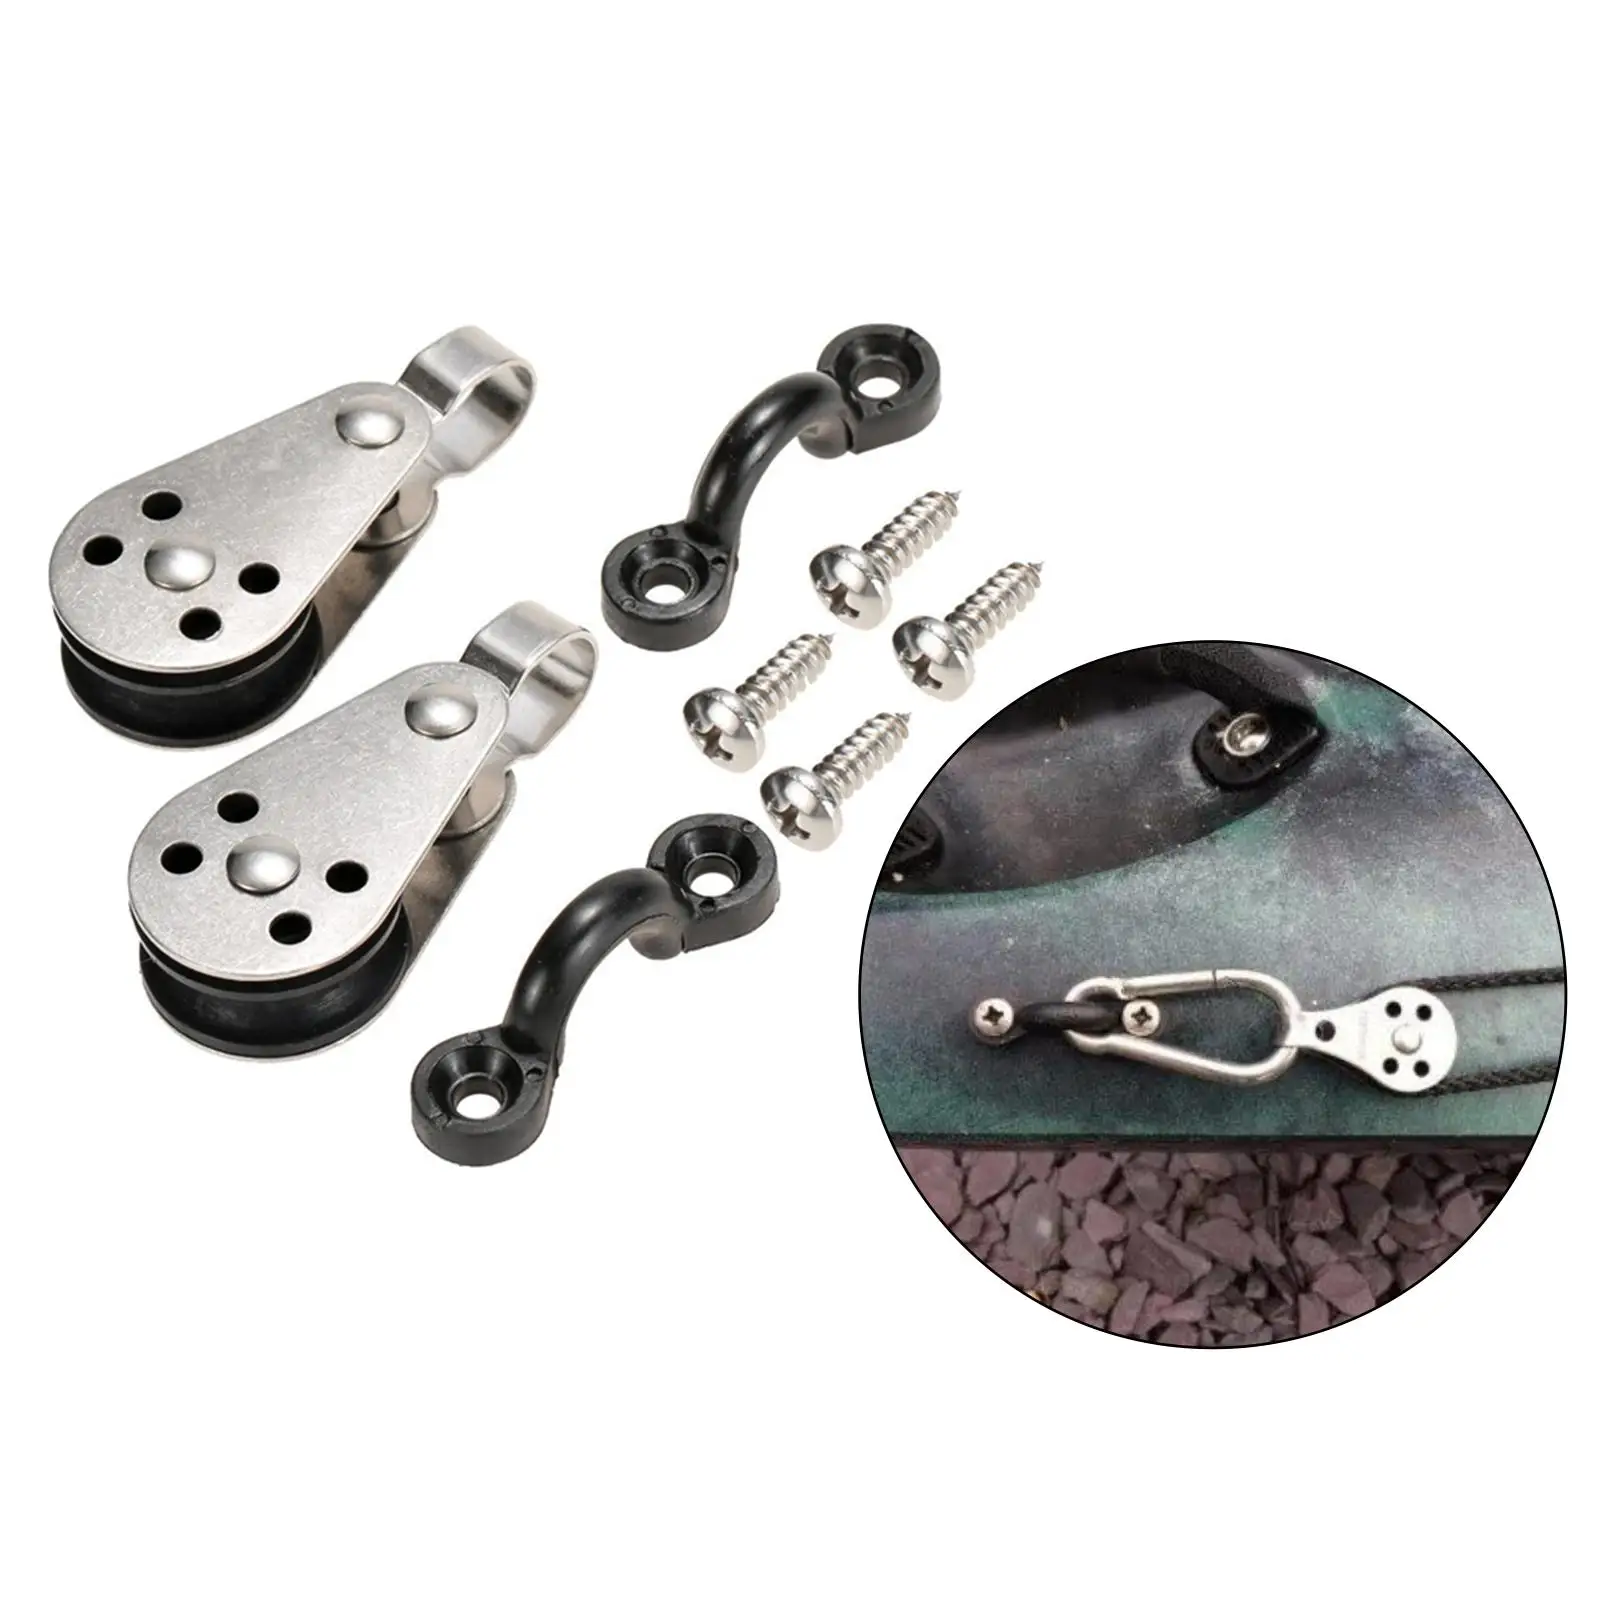 Kayak Anchor Trolley Kit 2 Pulley Blocks Screws Rivets Accessory for Rigging Tie